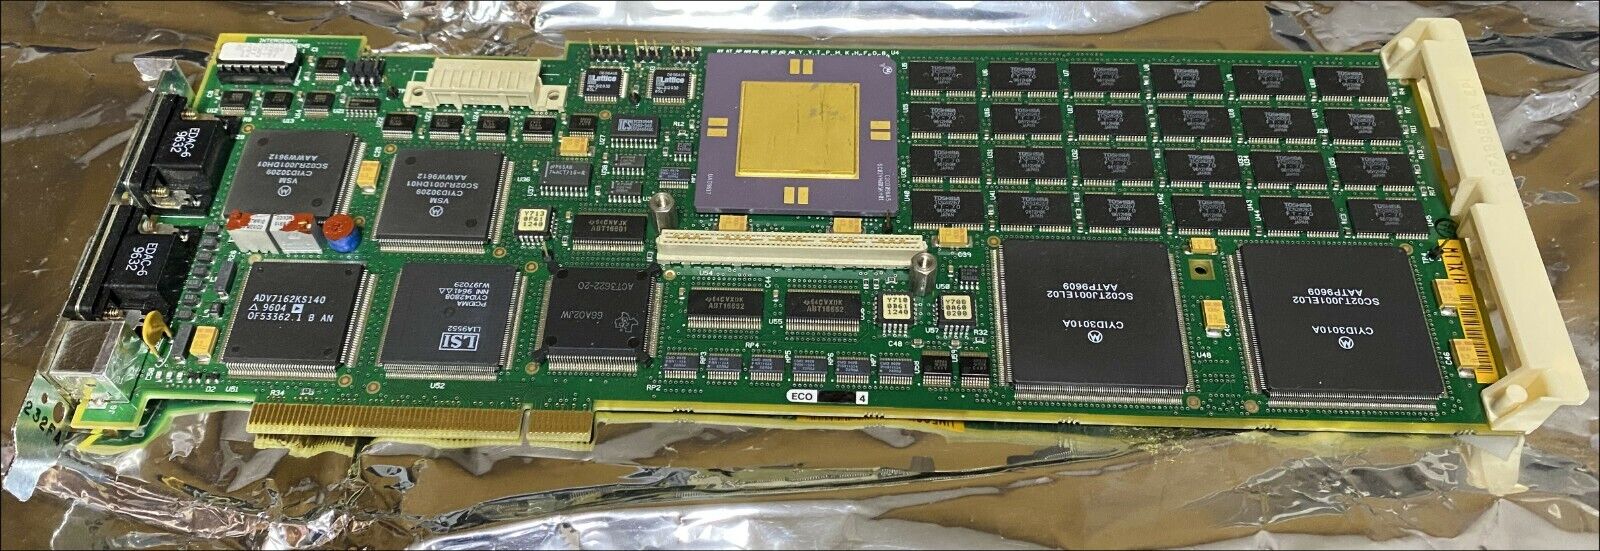 Intergraph GLZ1 MSMT299 SC02YH005KH01 PCI video card RARE for vintage collection